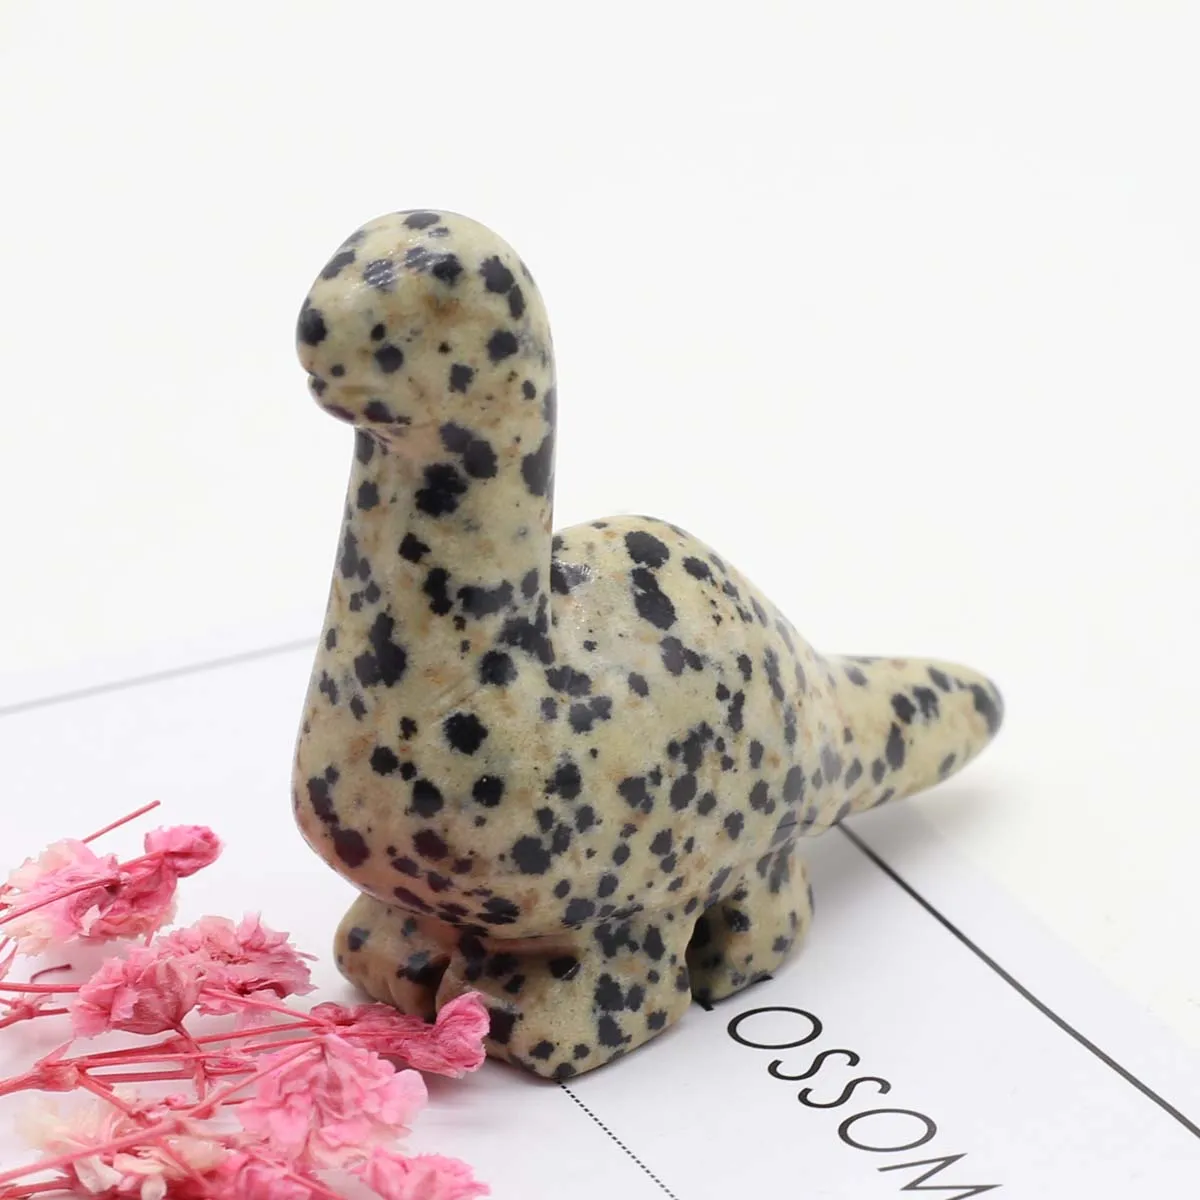 Dinosaur Stone Carving Figurine Healing Crystal Diplodocus Statue Home Decoration Natural Gemstone Craft Gift Room Ornament images - 6